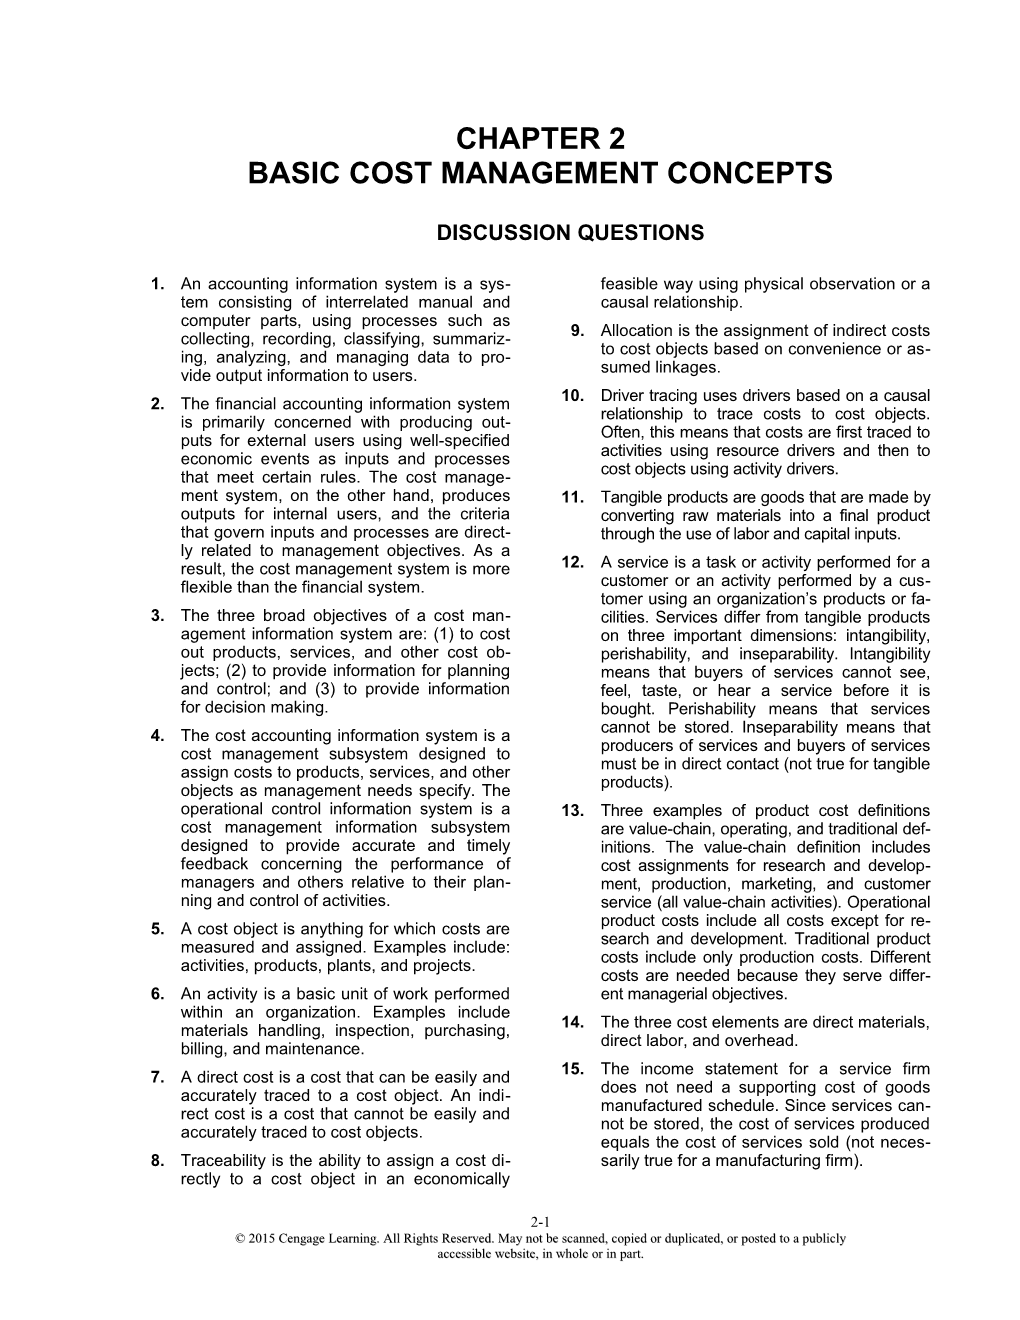 Chapter 2Basic Cost Management Concepts